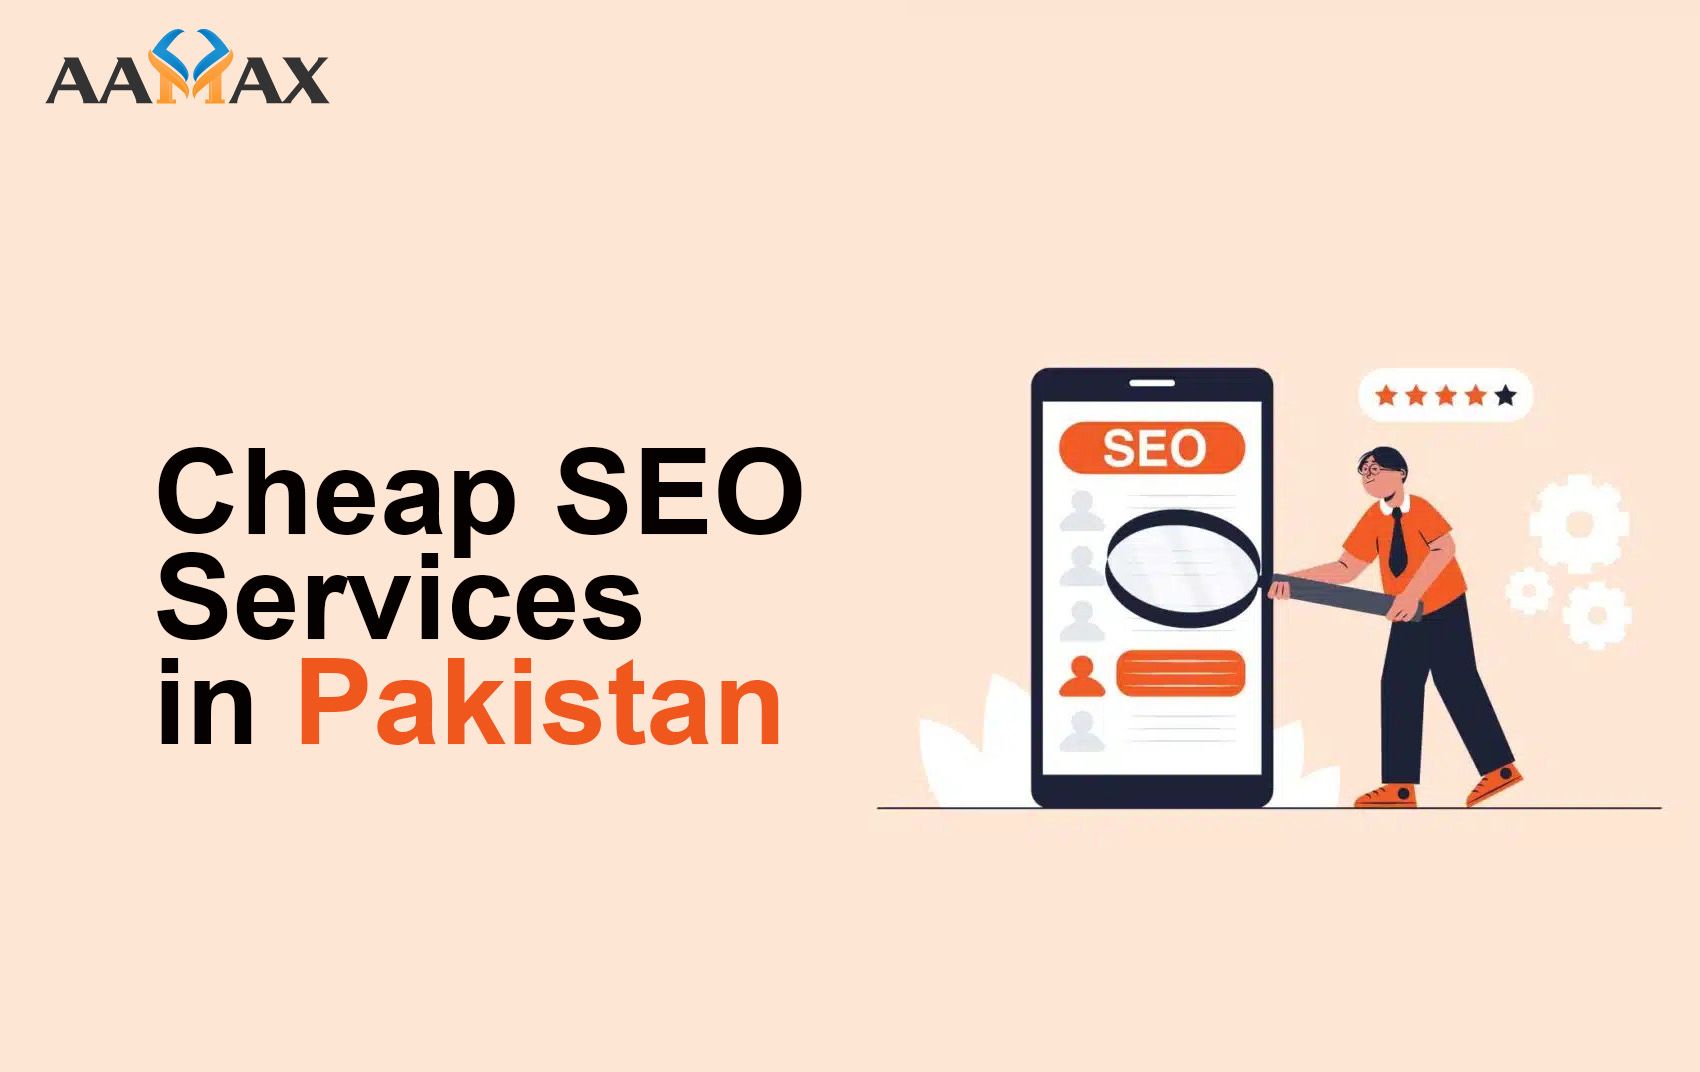 Cheap SEO Services in Pakistan